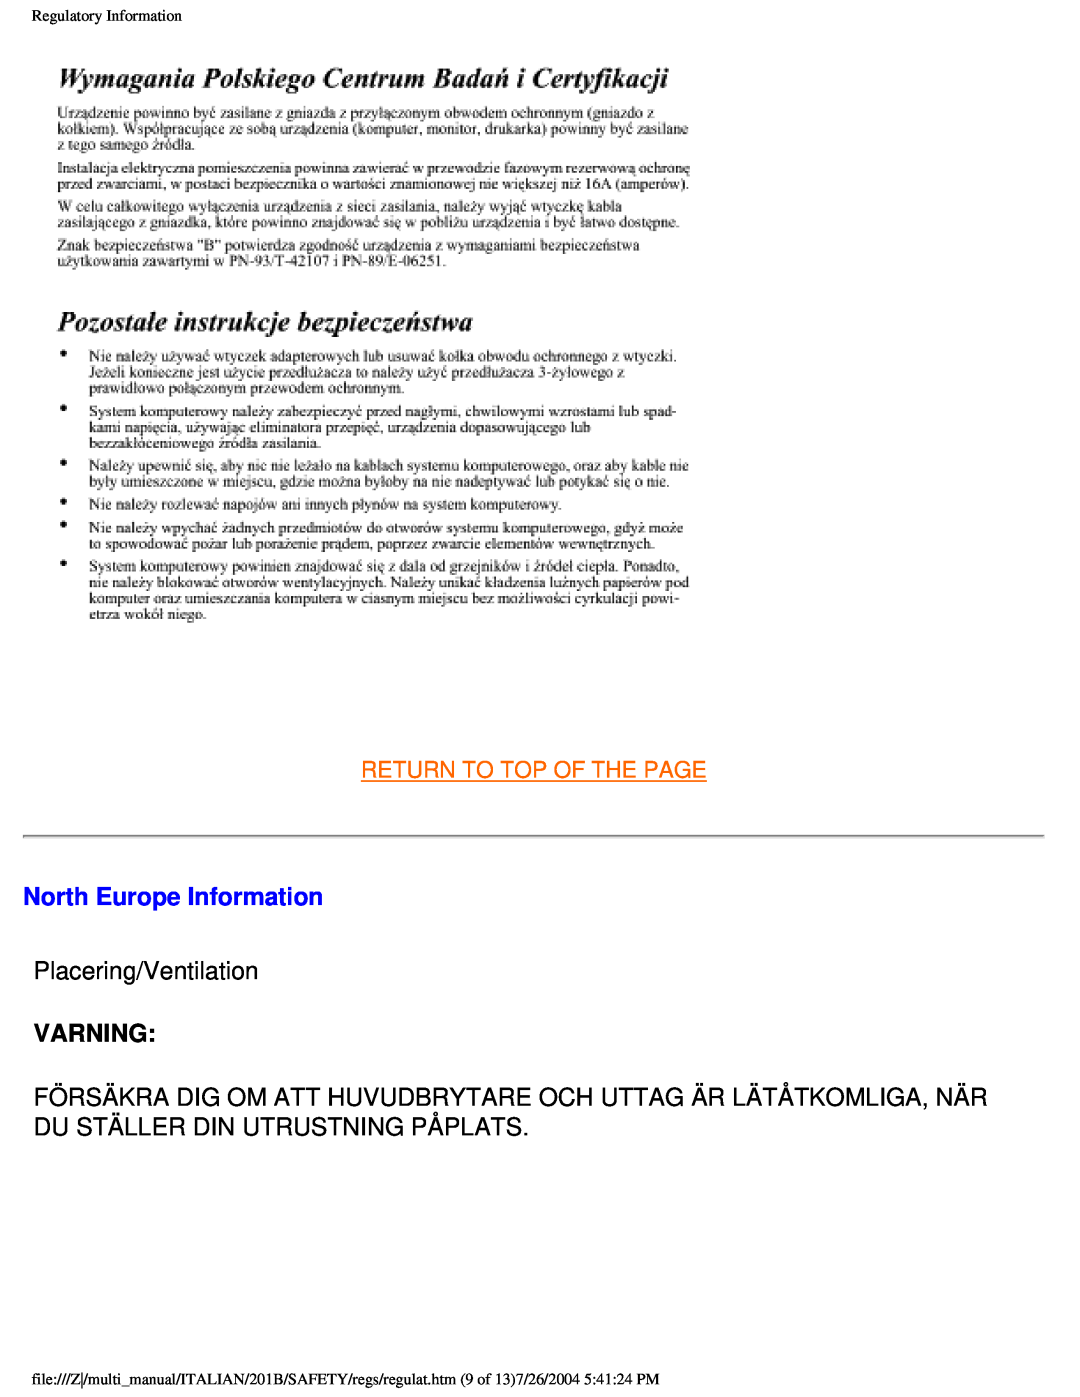 Philips 201B user manual North Europe Information, Varning, Return To Top Of The Page, Regulatory Information 